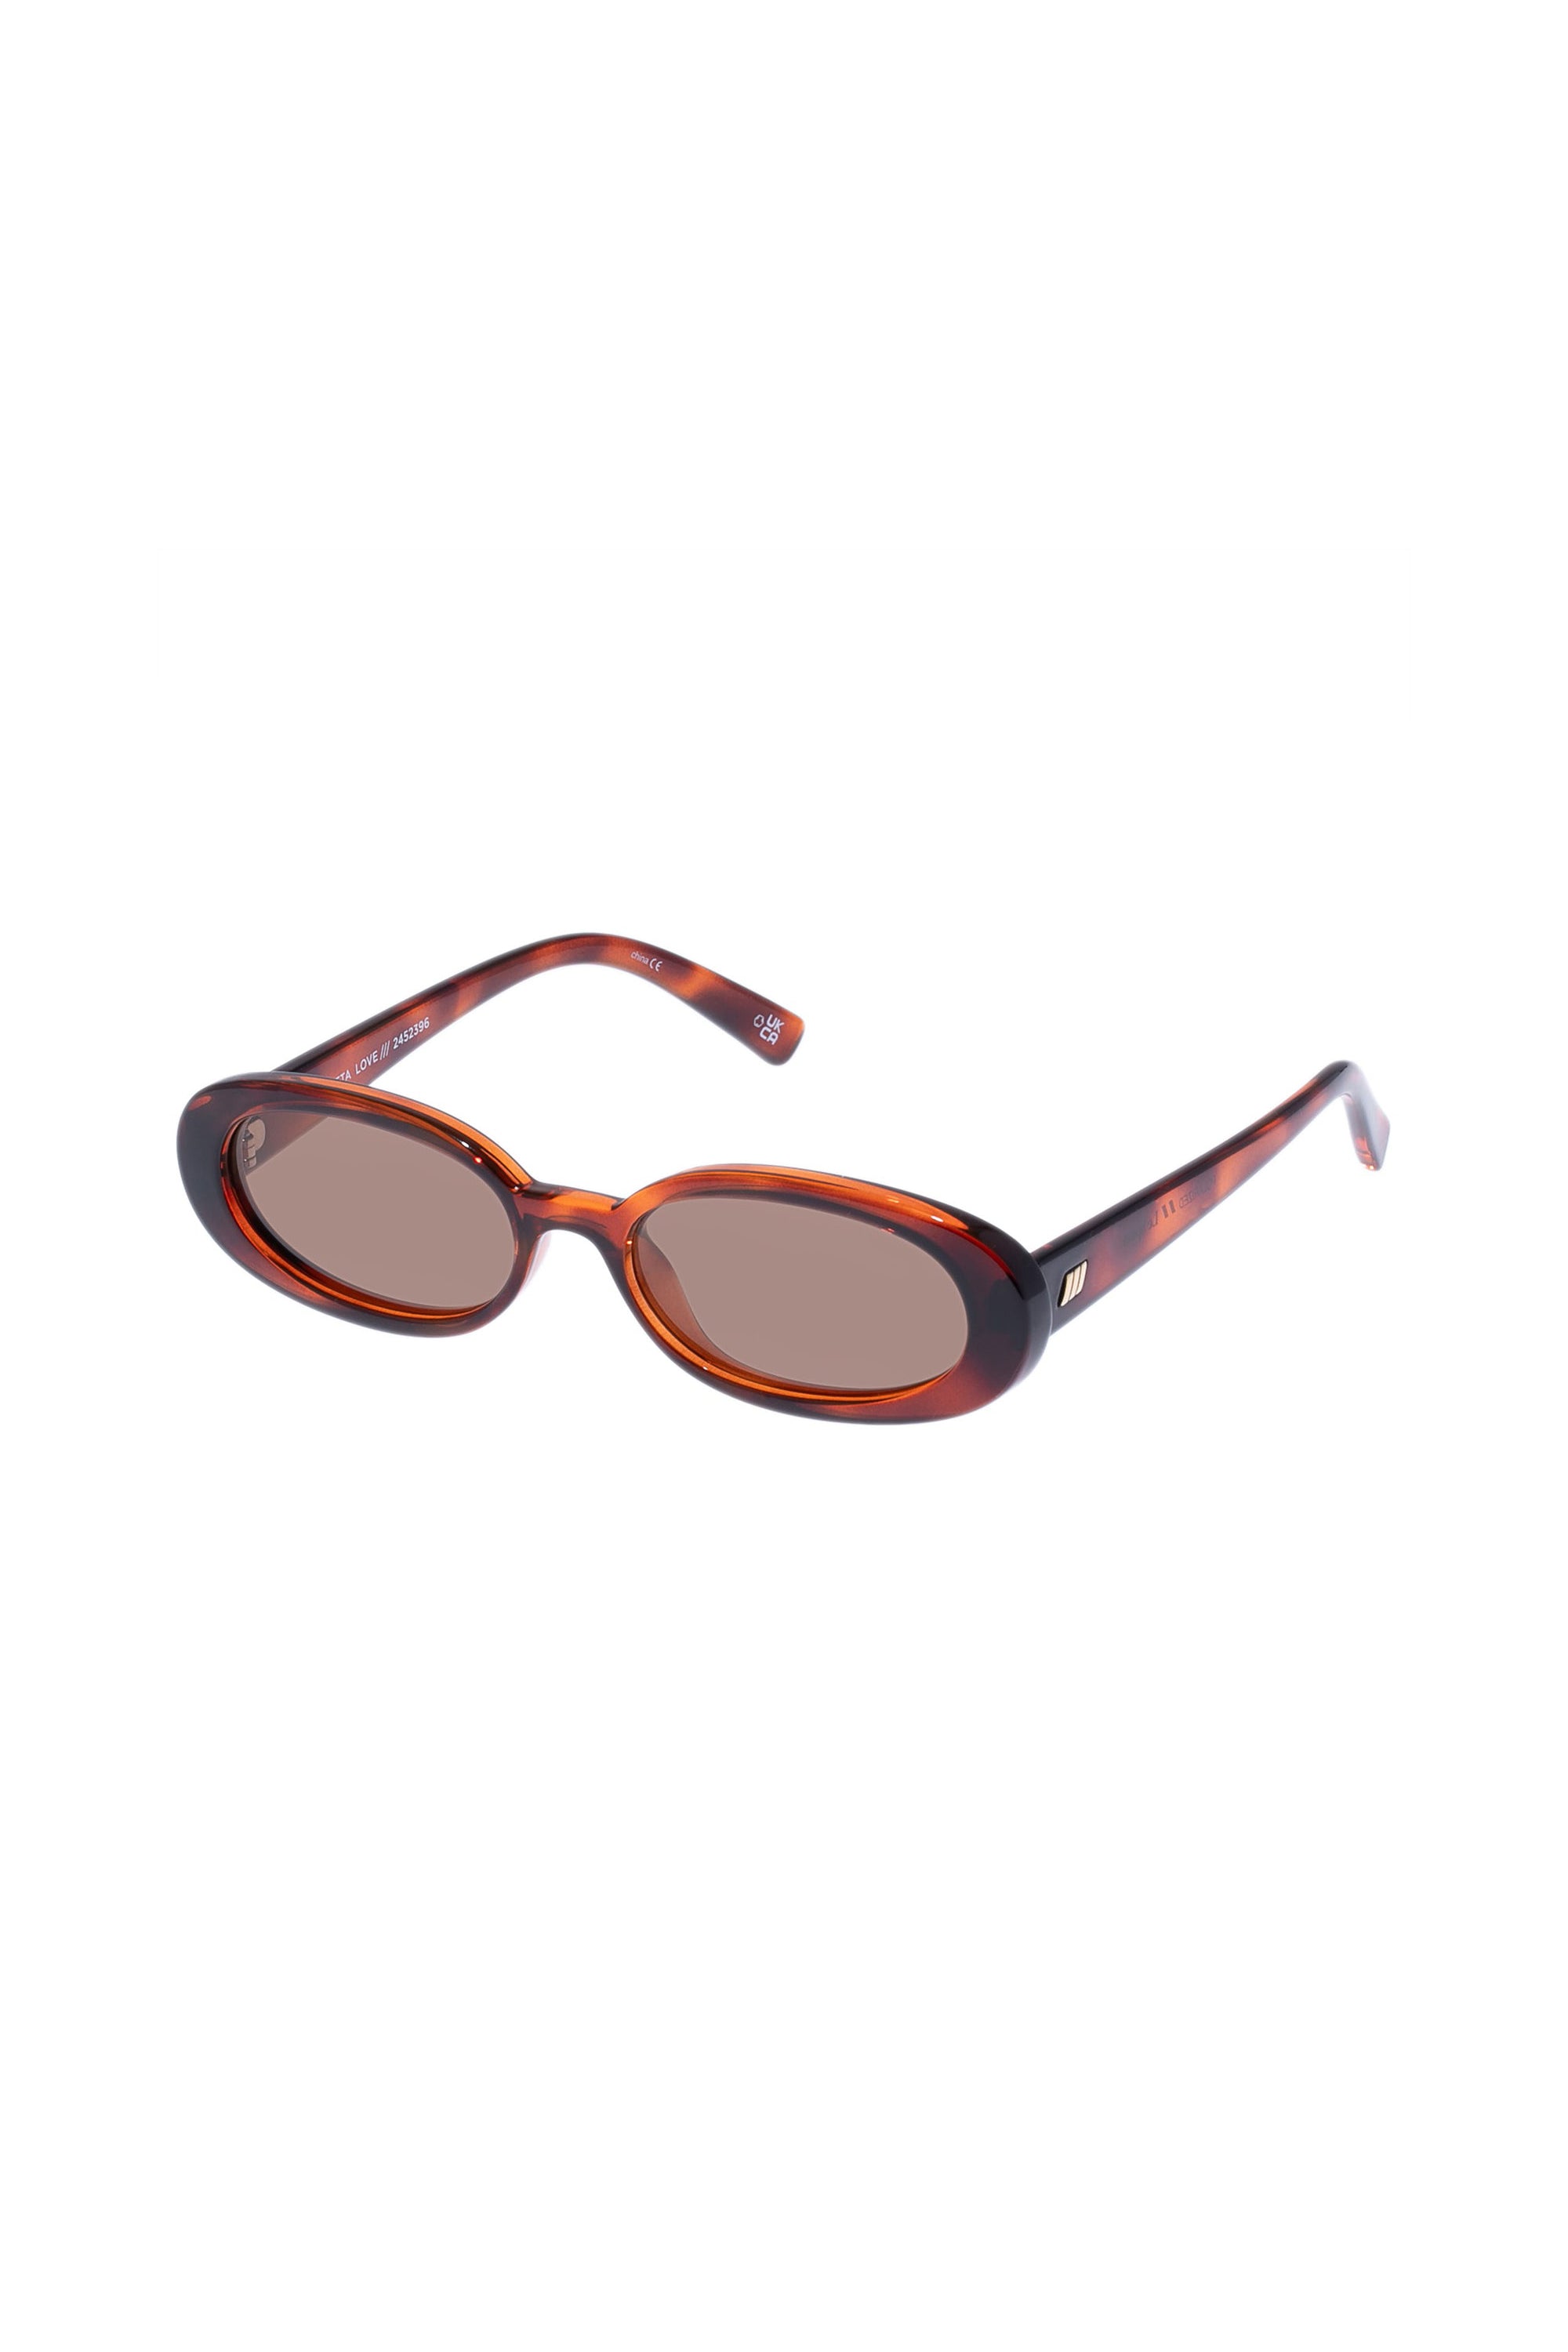 Outta Love Sunglasses - Toffee Tort *Polarized*